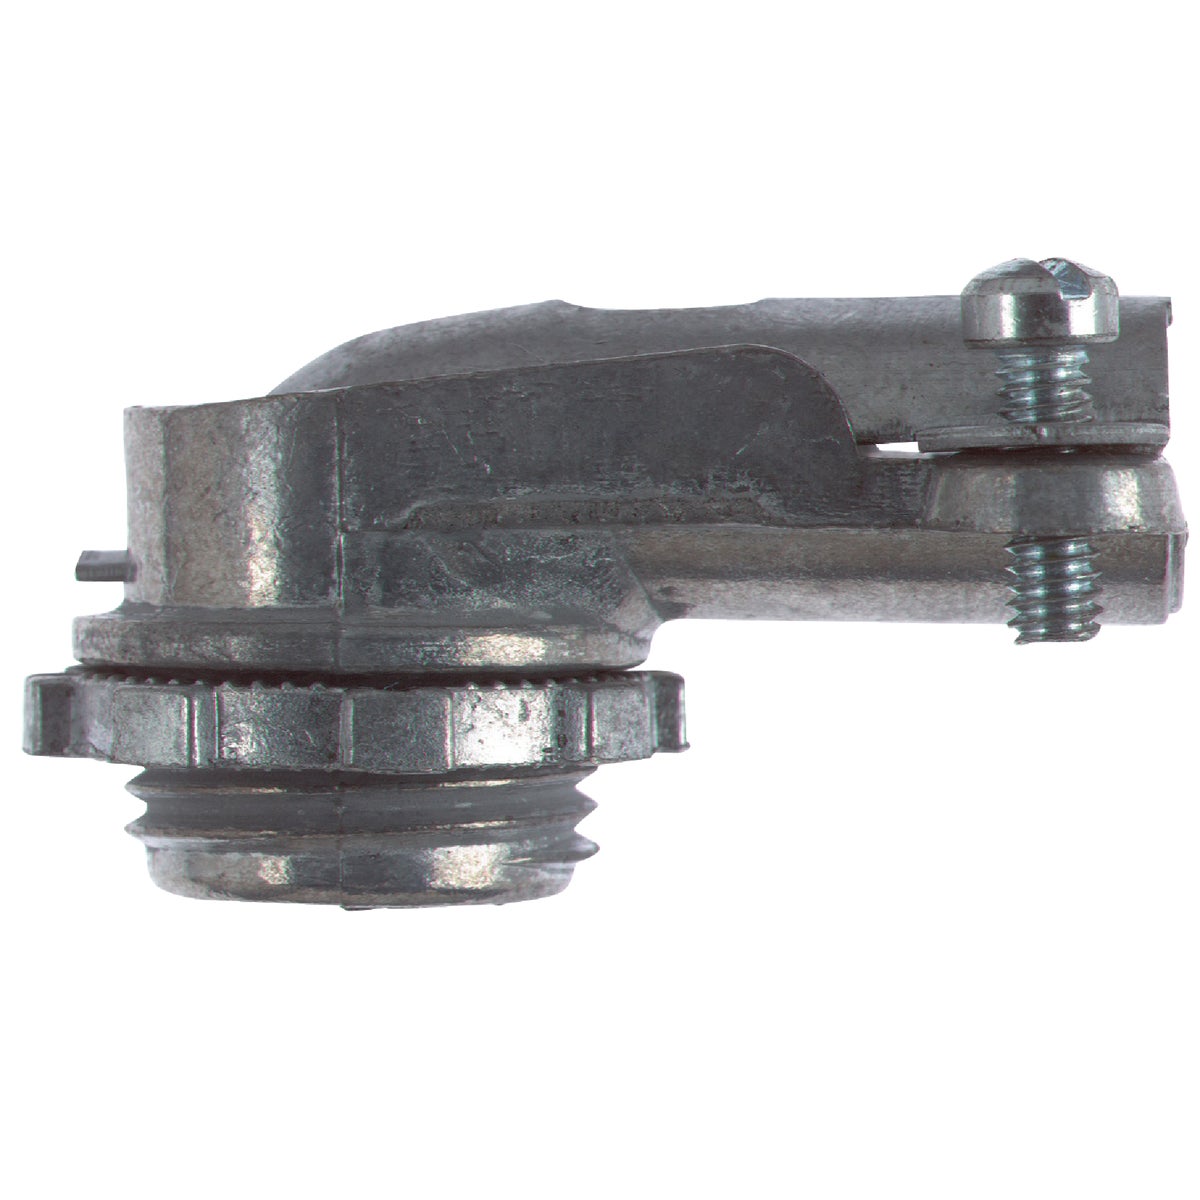 Halex 1/2 In. Clamp 90 Degree Armored Cable/Conduit Connector